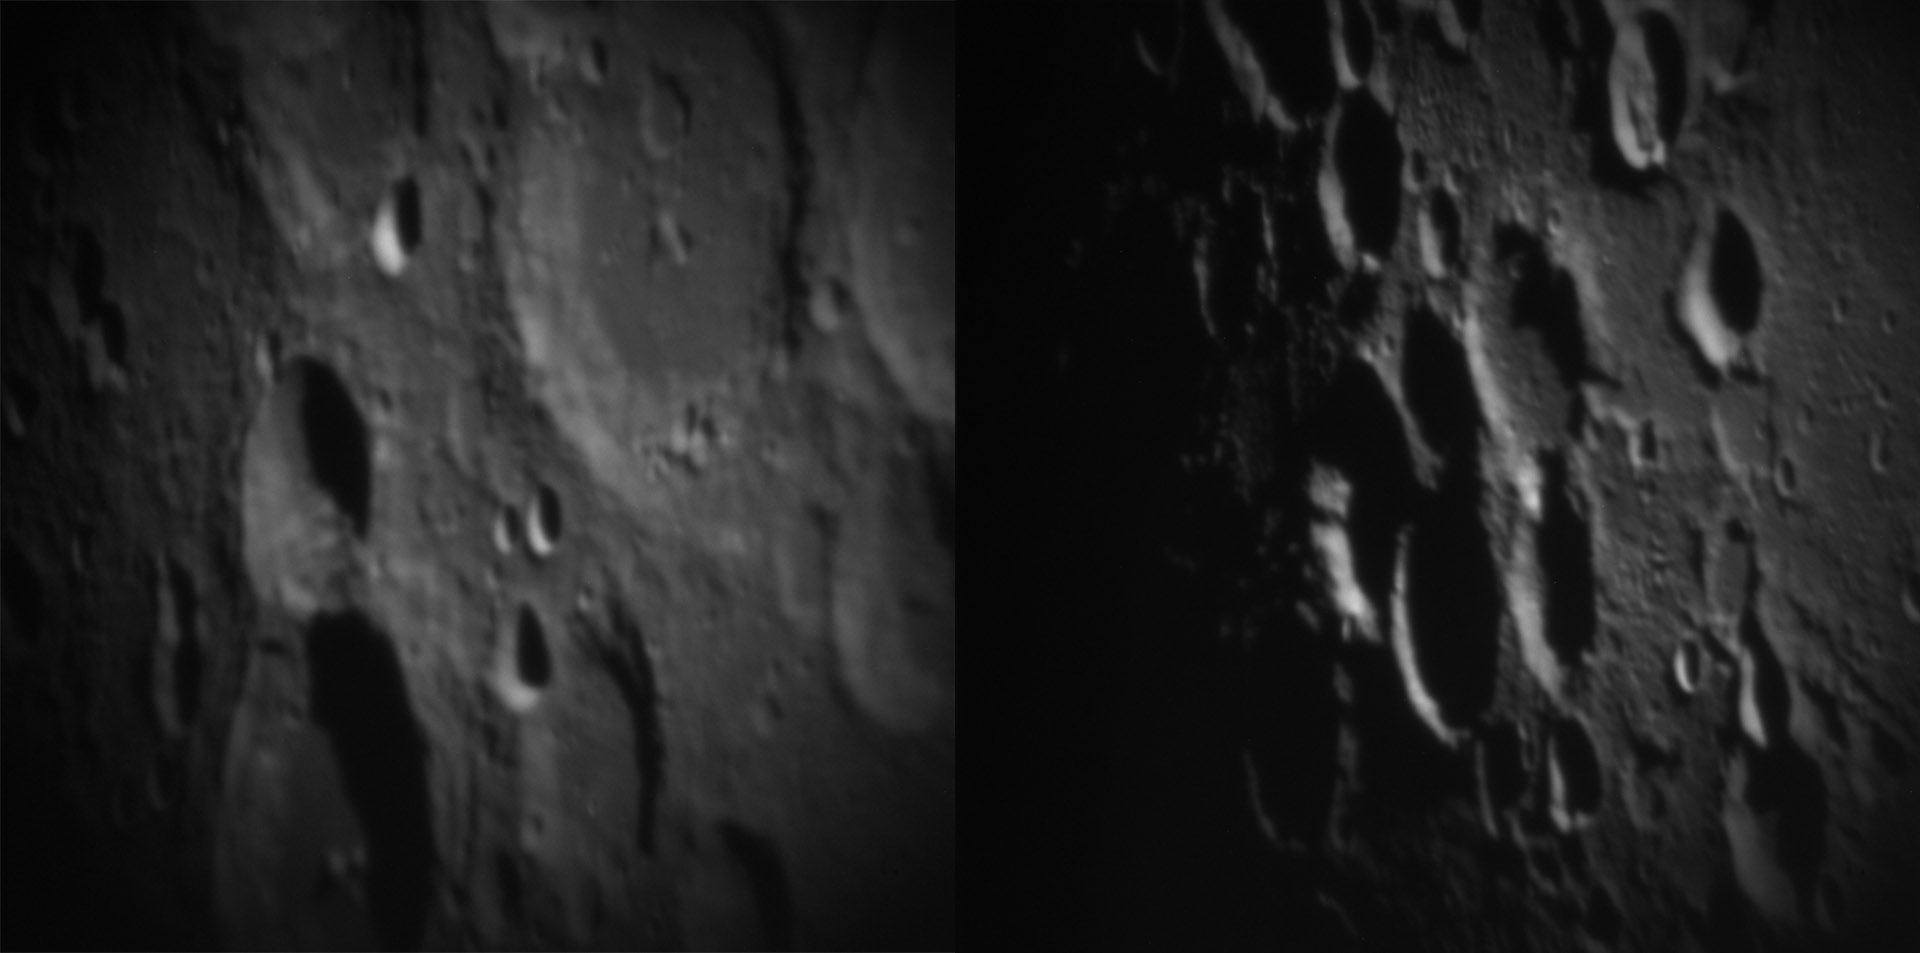 Images of the Moon for testing DKIST telescope